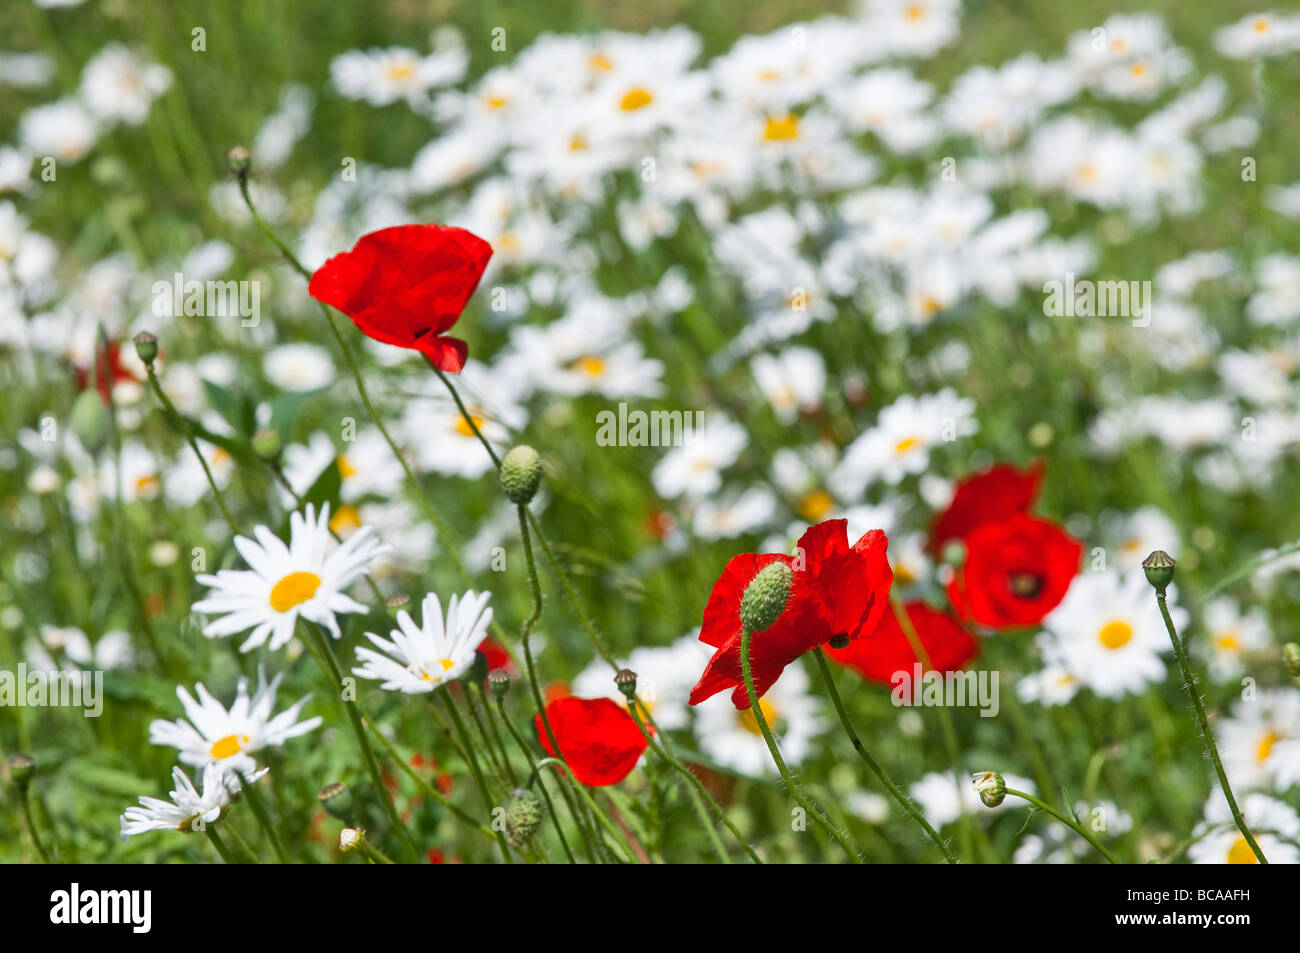 Swathe of Common Poppy and Ox-eye Daisy flowers - Indre-et-Loire, France. Stock Photo